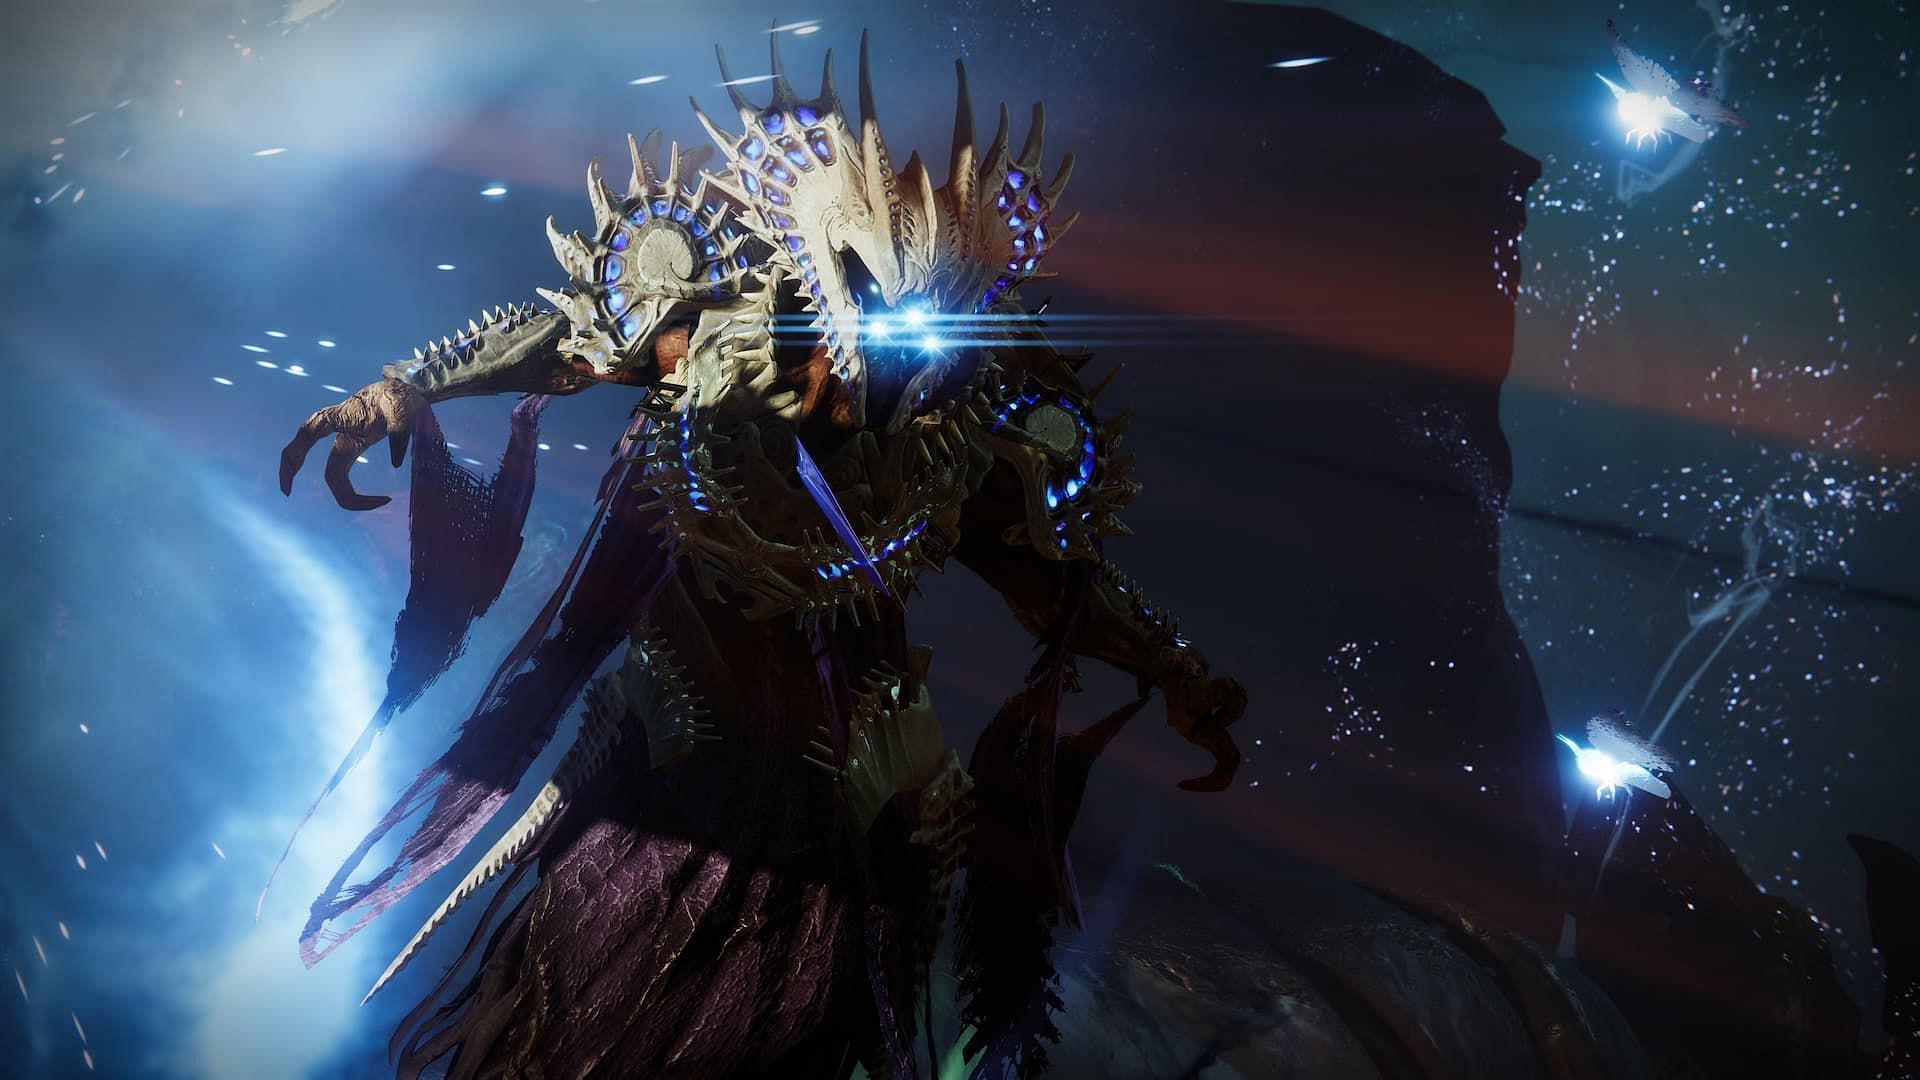 Destiny 2 features powerful dungeon boss encounters (Image via Bungie)